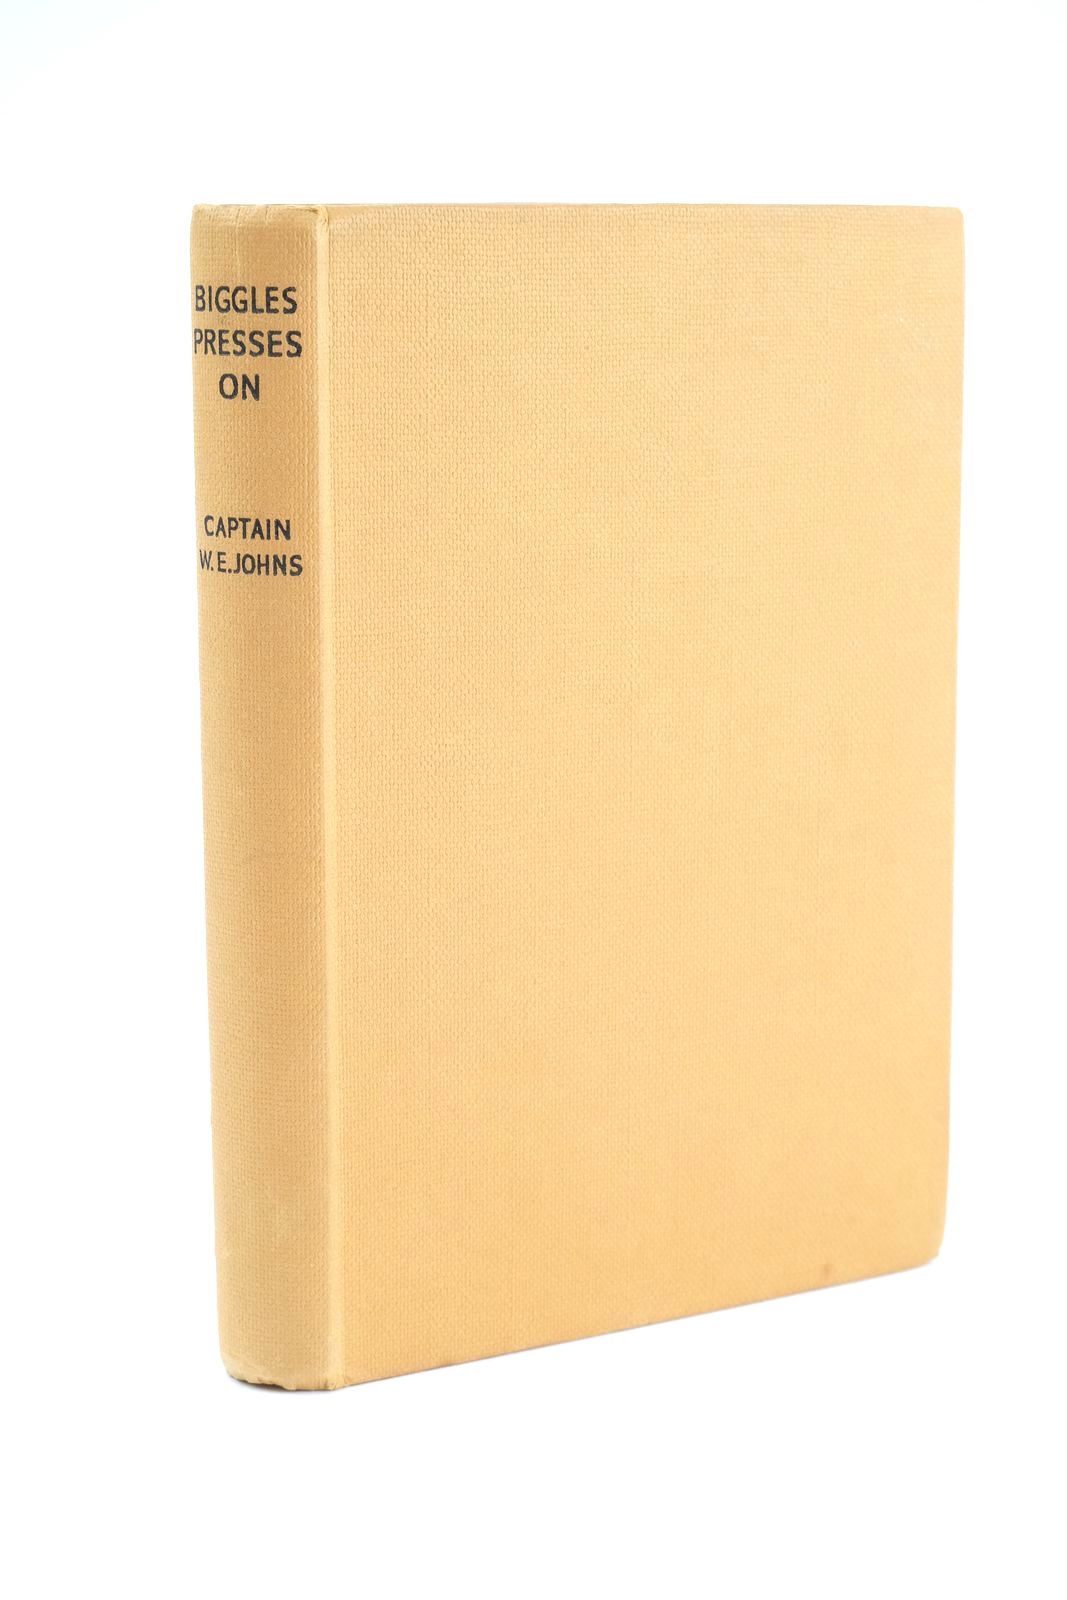 Photo of BIGGLES PRESSES ON written by Johns, W.E. illustrated by Stead, Leslie published by The Children's Book Club (STOCK CODE: 1323924)  for sale by Stella & Rose's Books